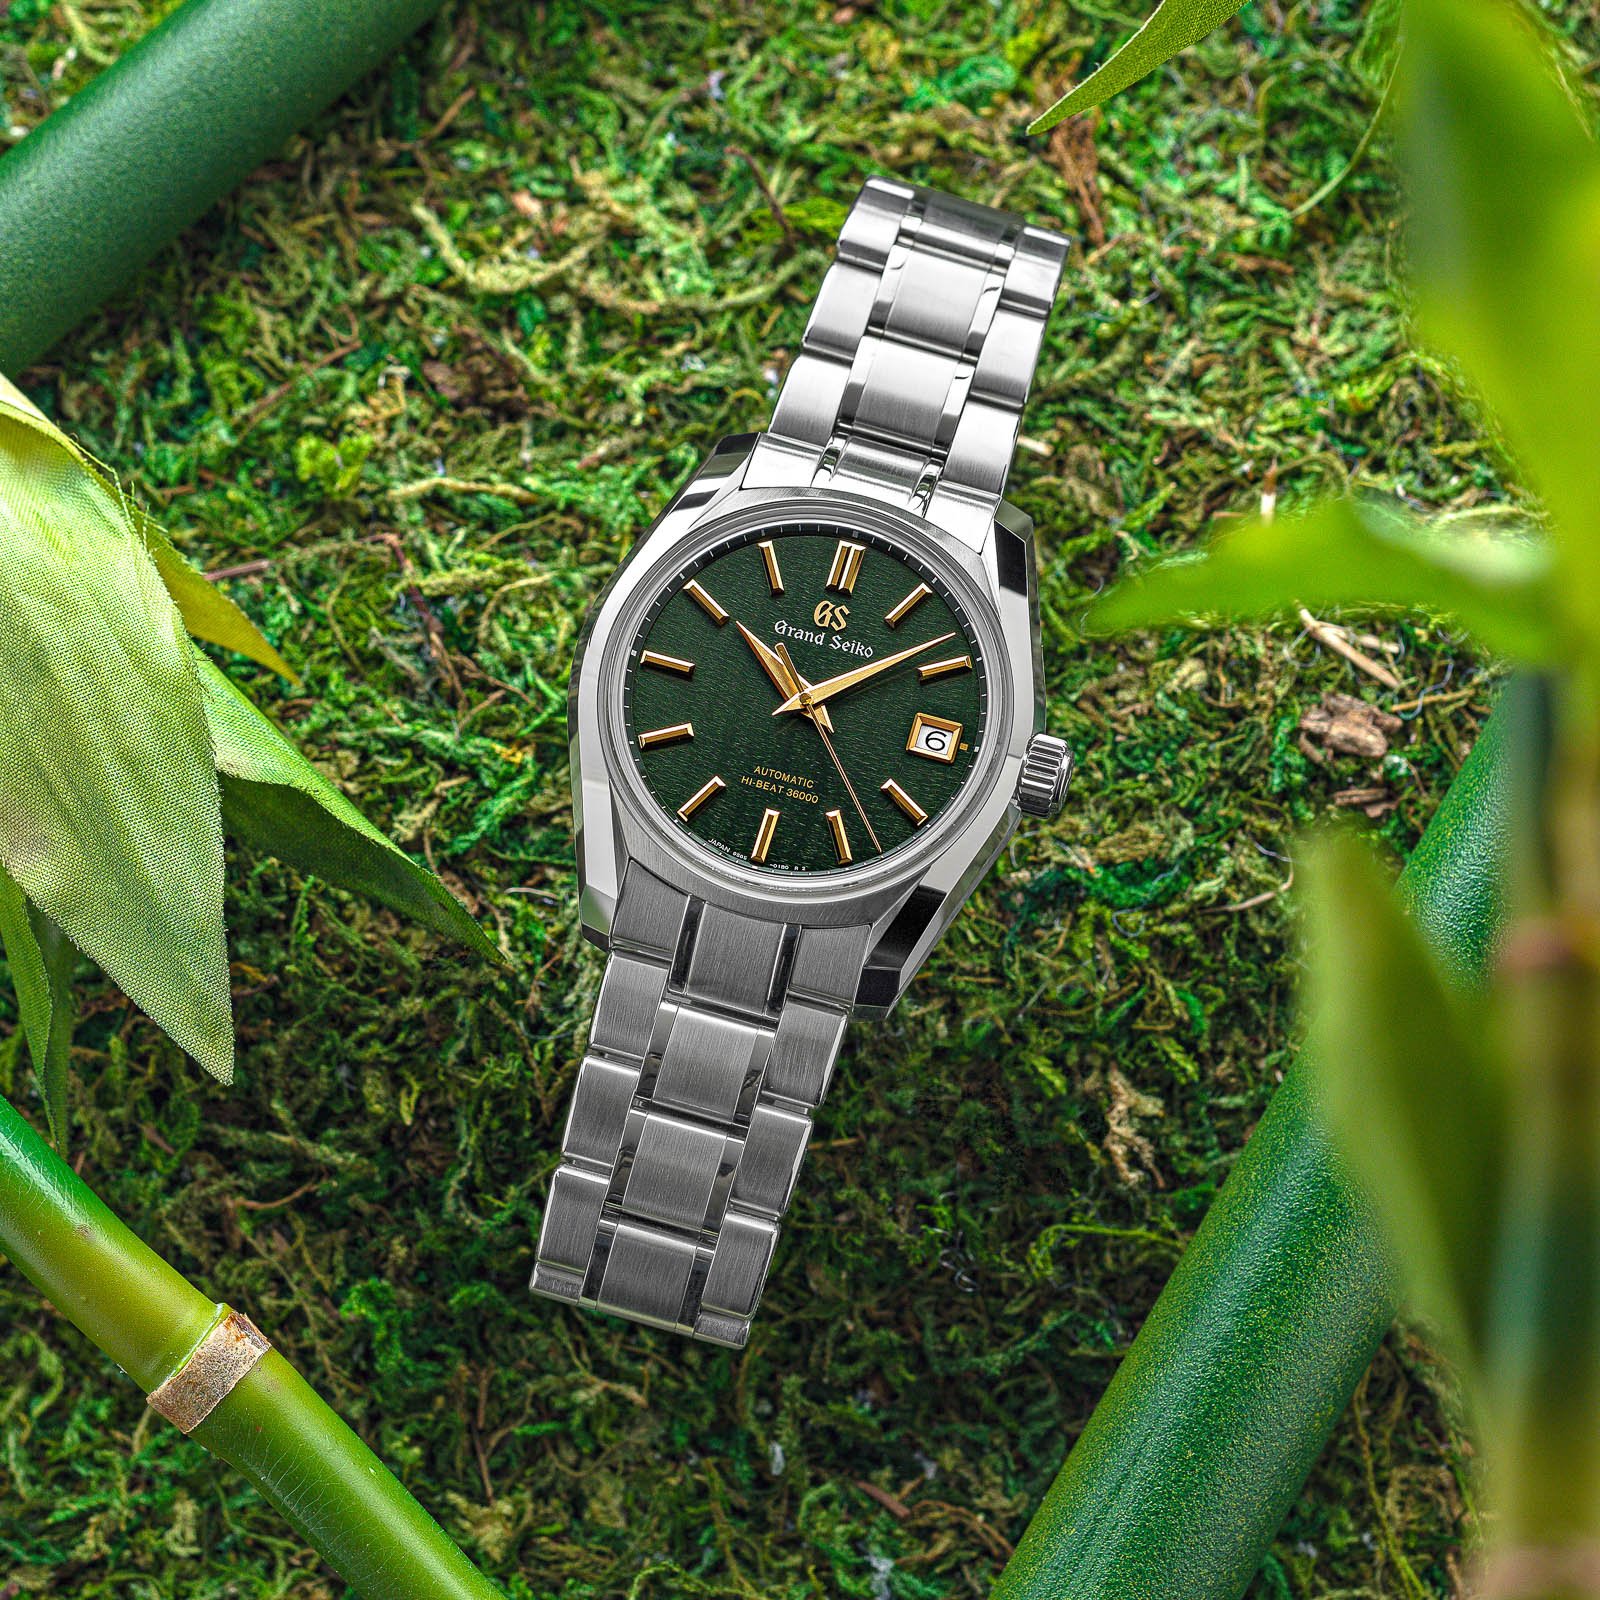 Green-dialed stainless steel wristwatch with gold-tone indexes and hands. 